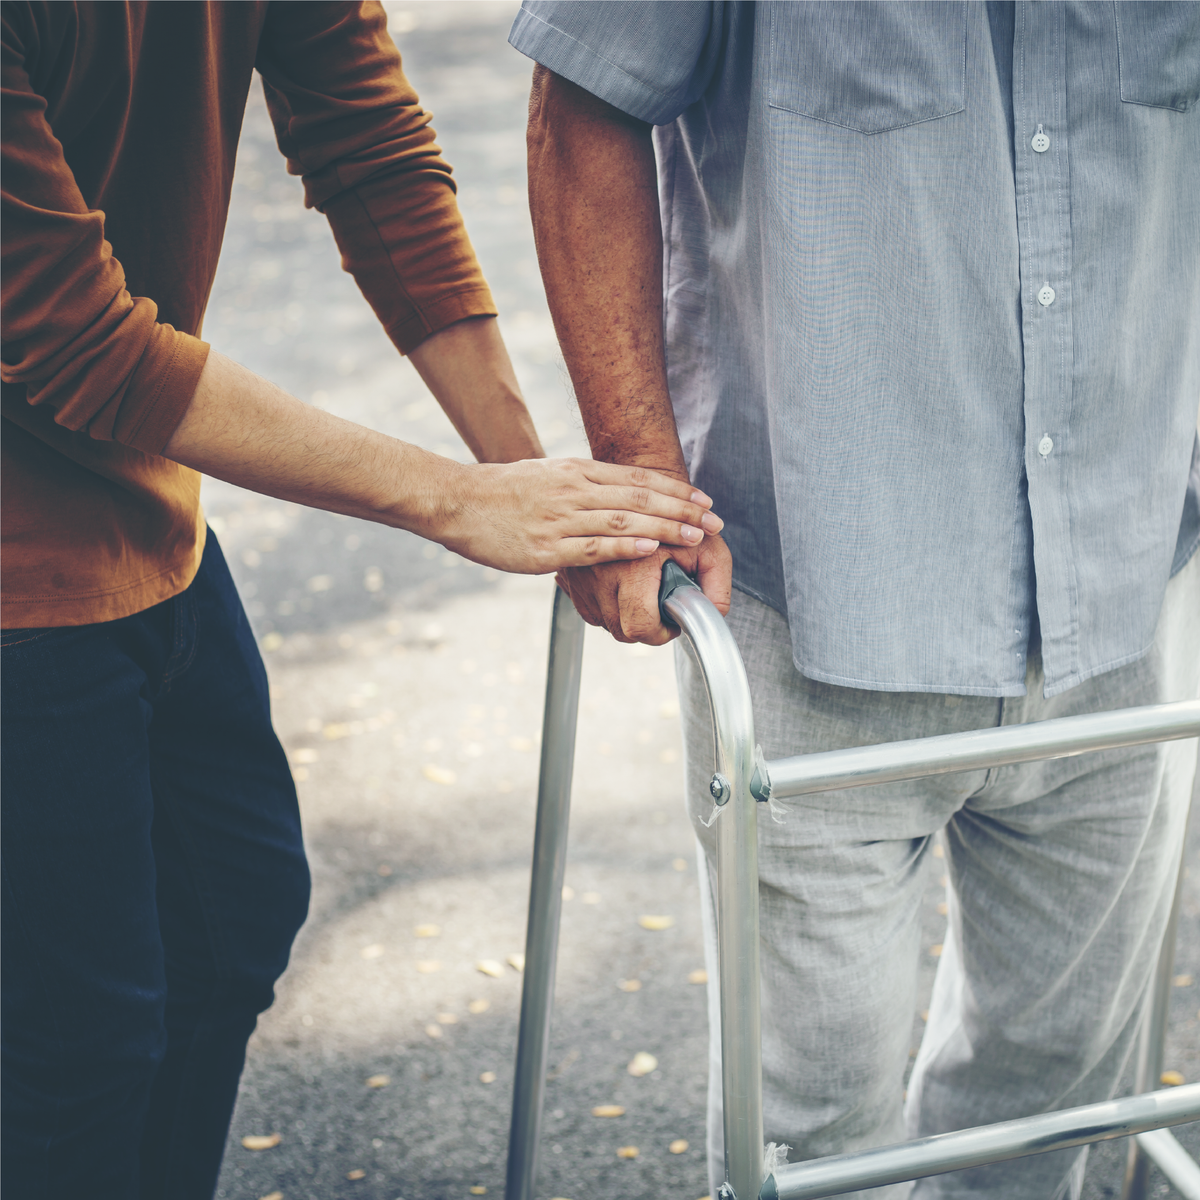 A woman holding an elderly man’s hand while using a walker